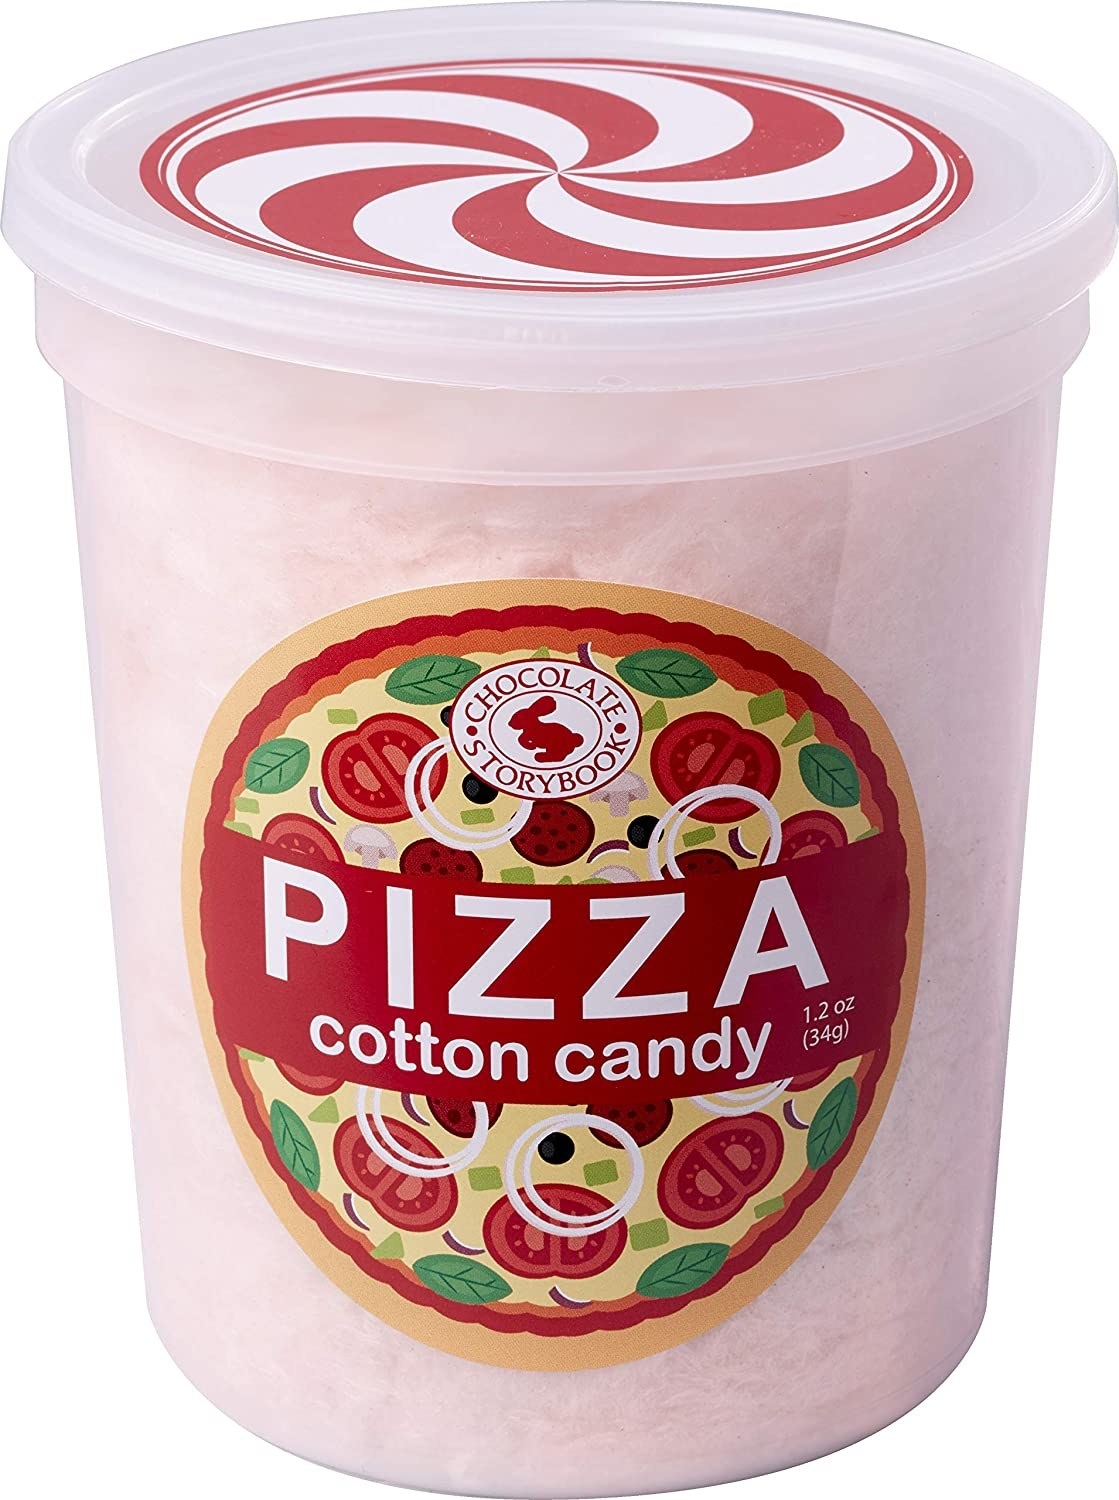 The tub of pizza flavored cotton candy